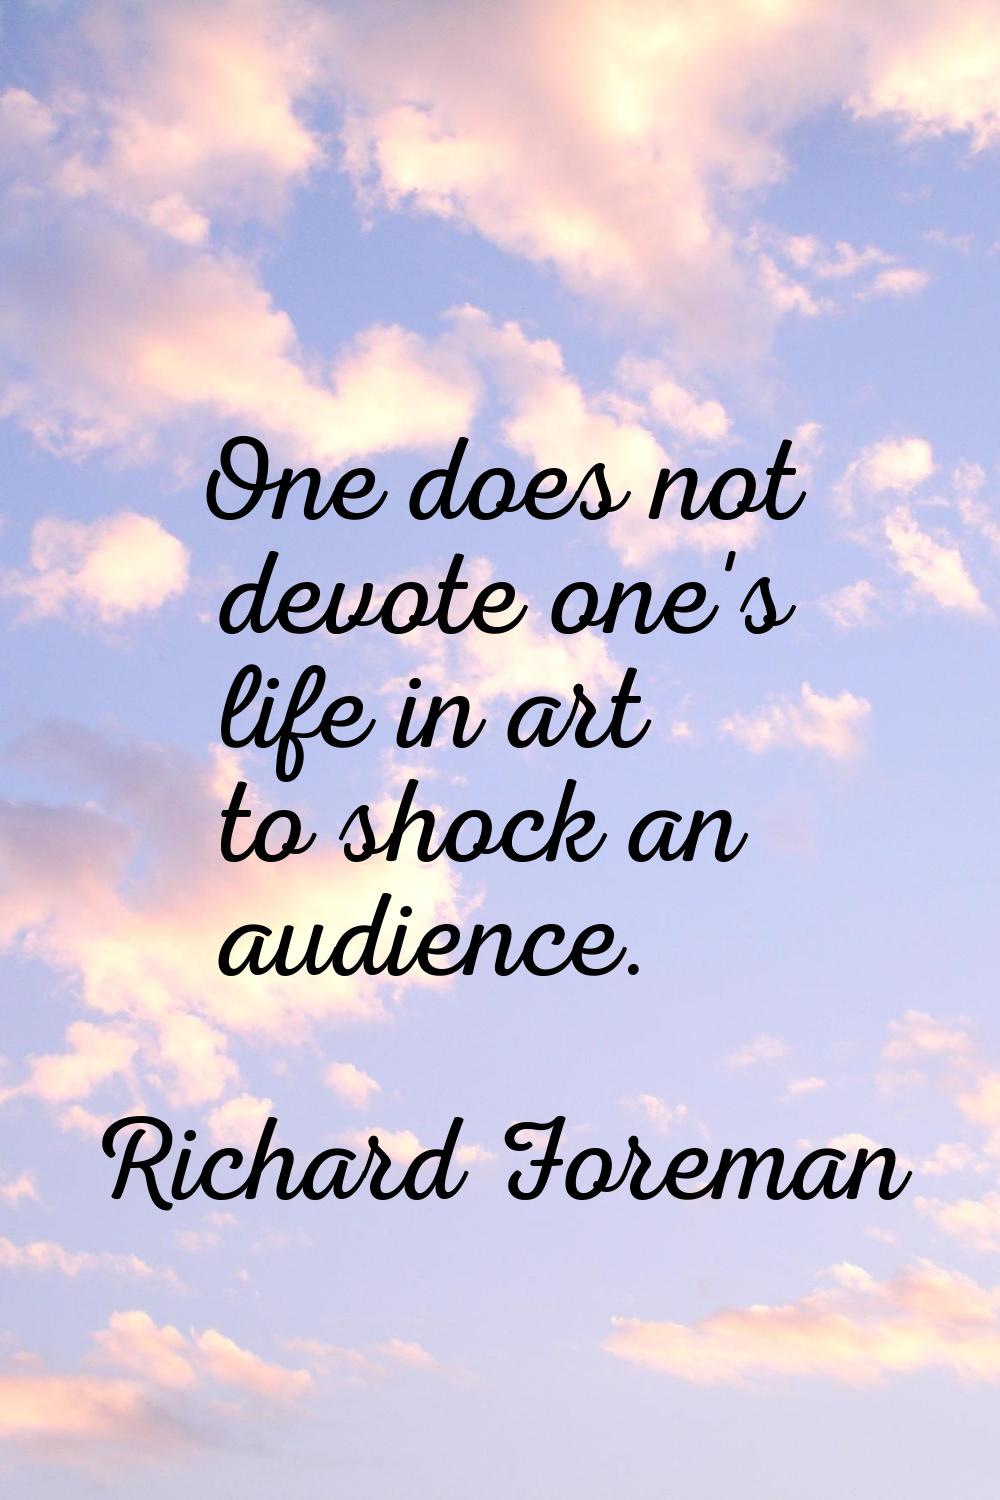 One does not devote one's life in art to shock an audience.